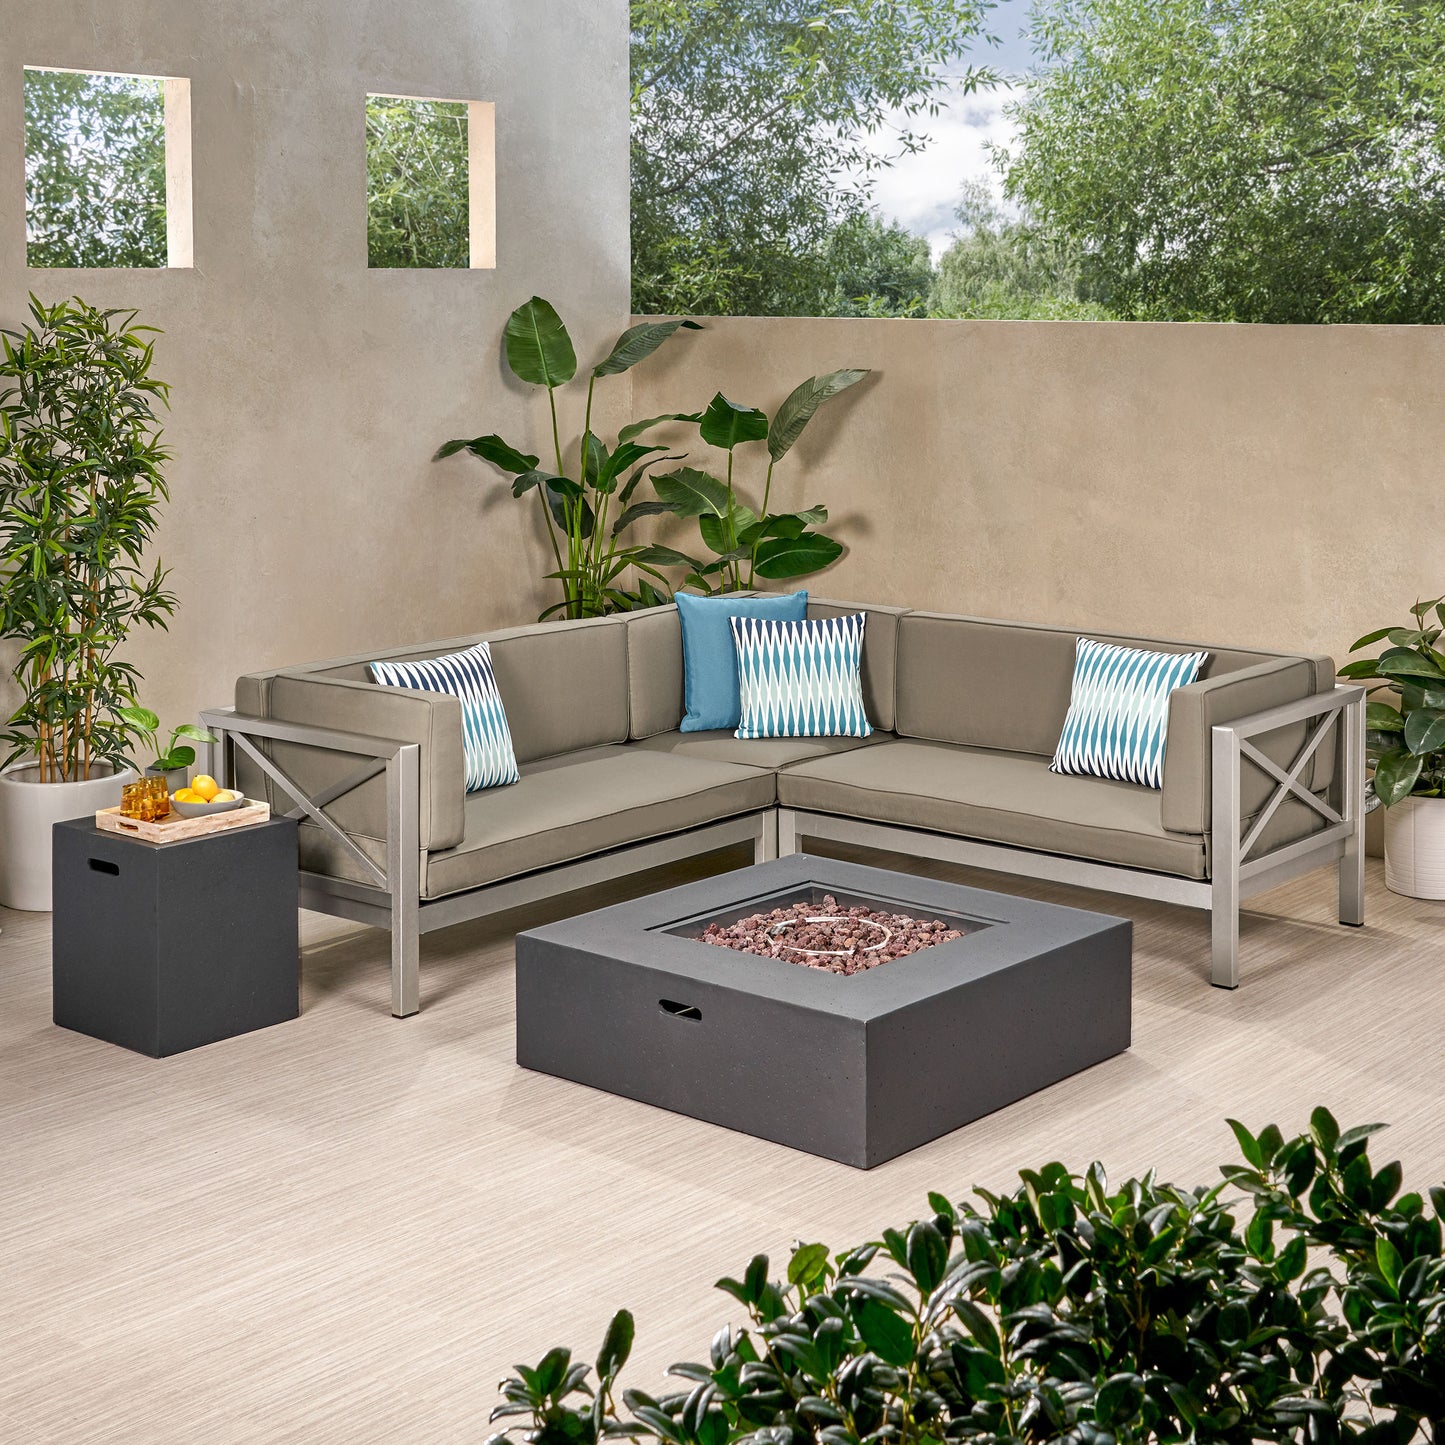 Morocco Vista Outdoor Modern 5 Seater V-Shaped Sectional Sofa Set with Fire Pit and Tank Holder